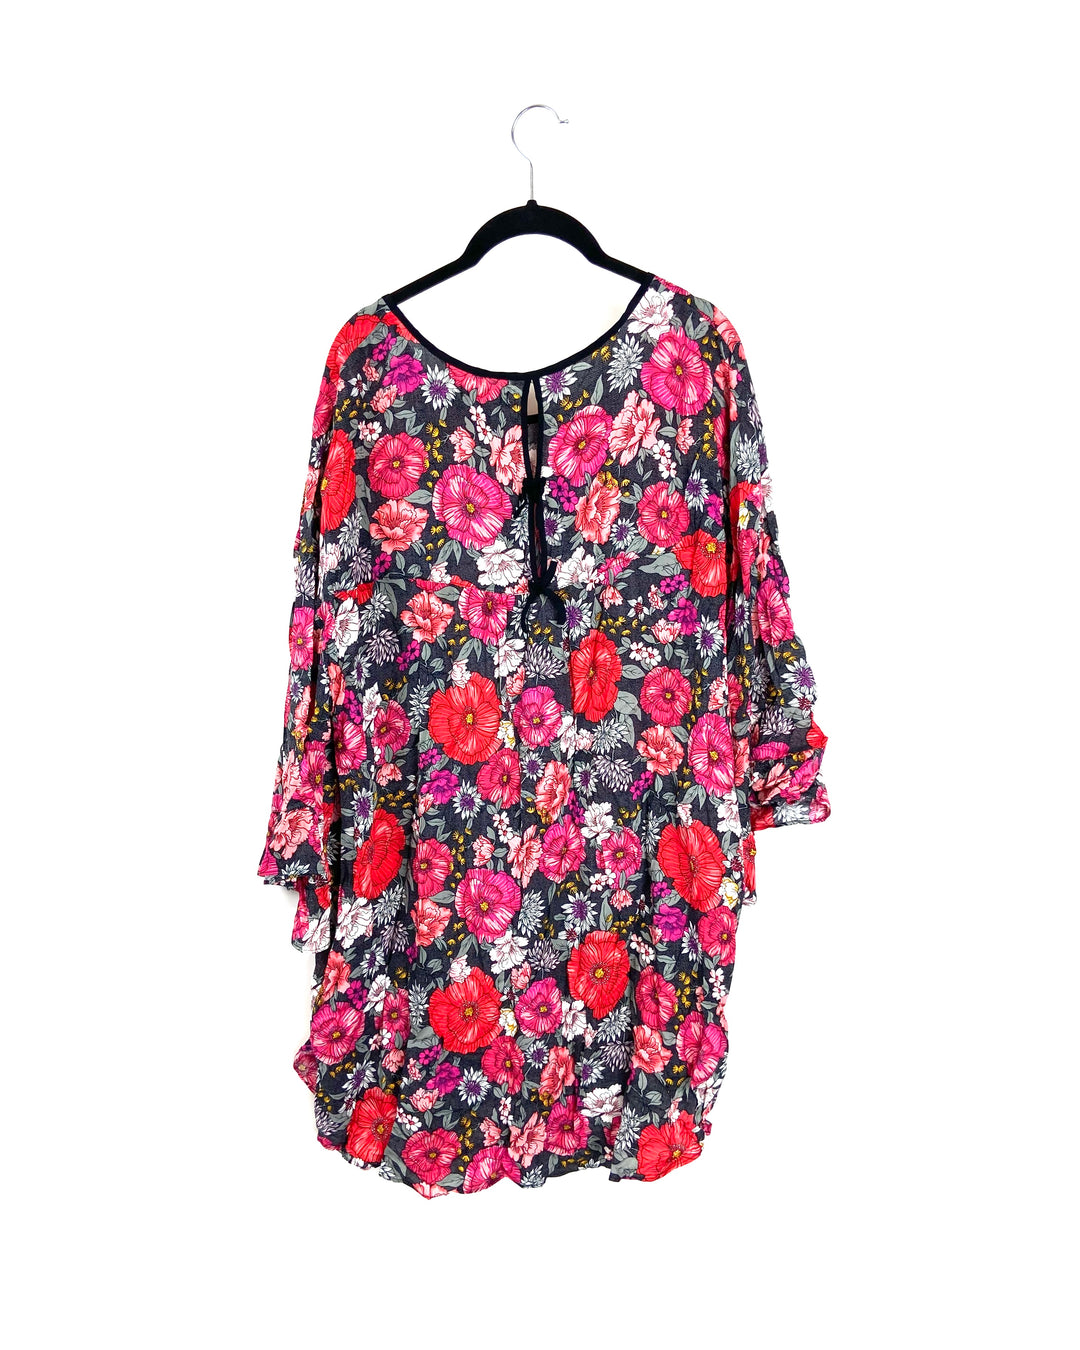 Floral Printed Quarter Sleeve Blouse - Size 1X